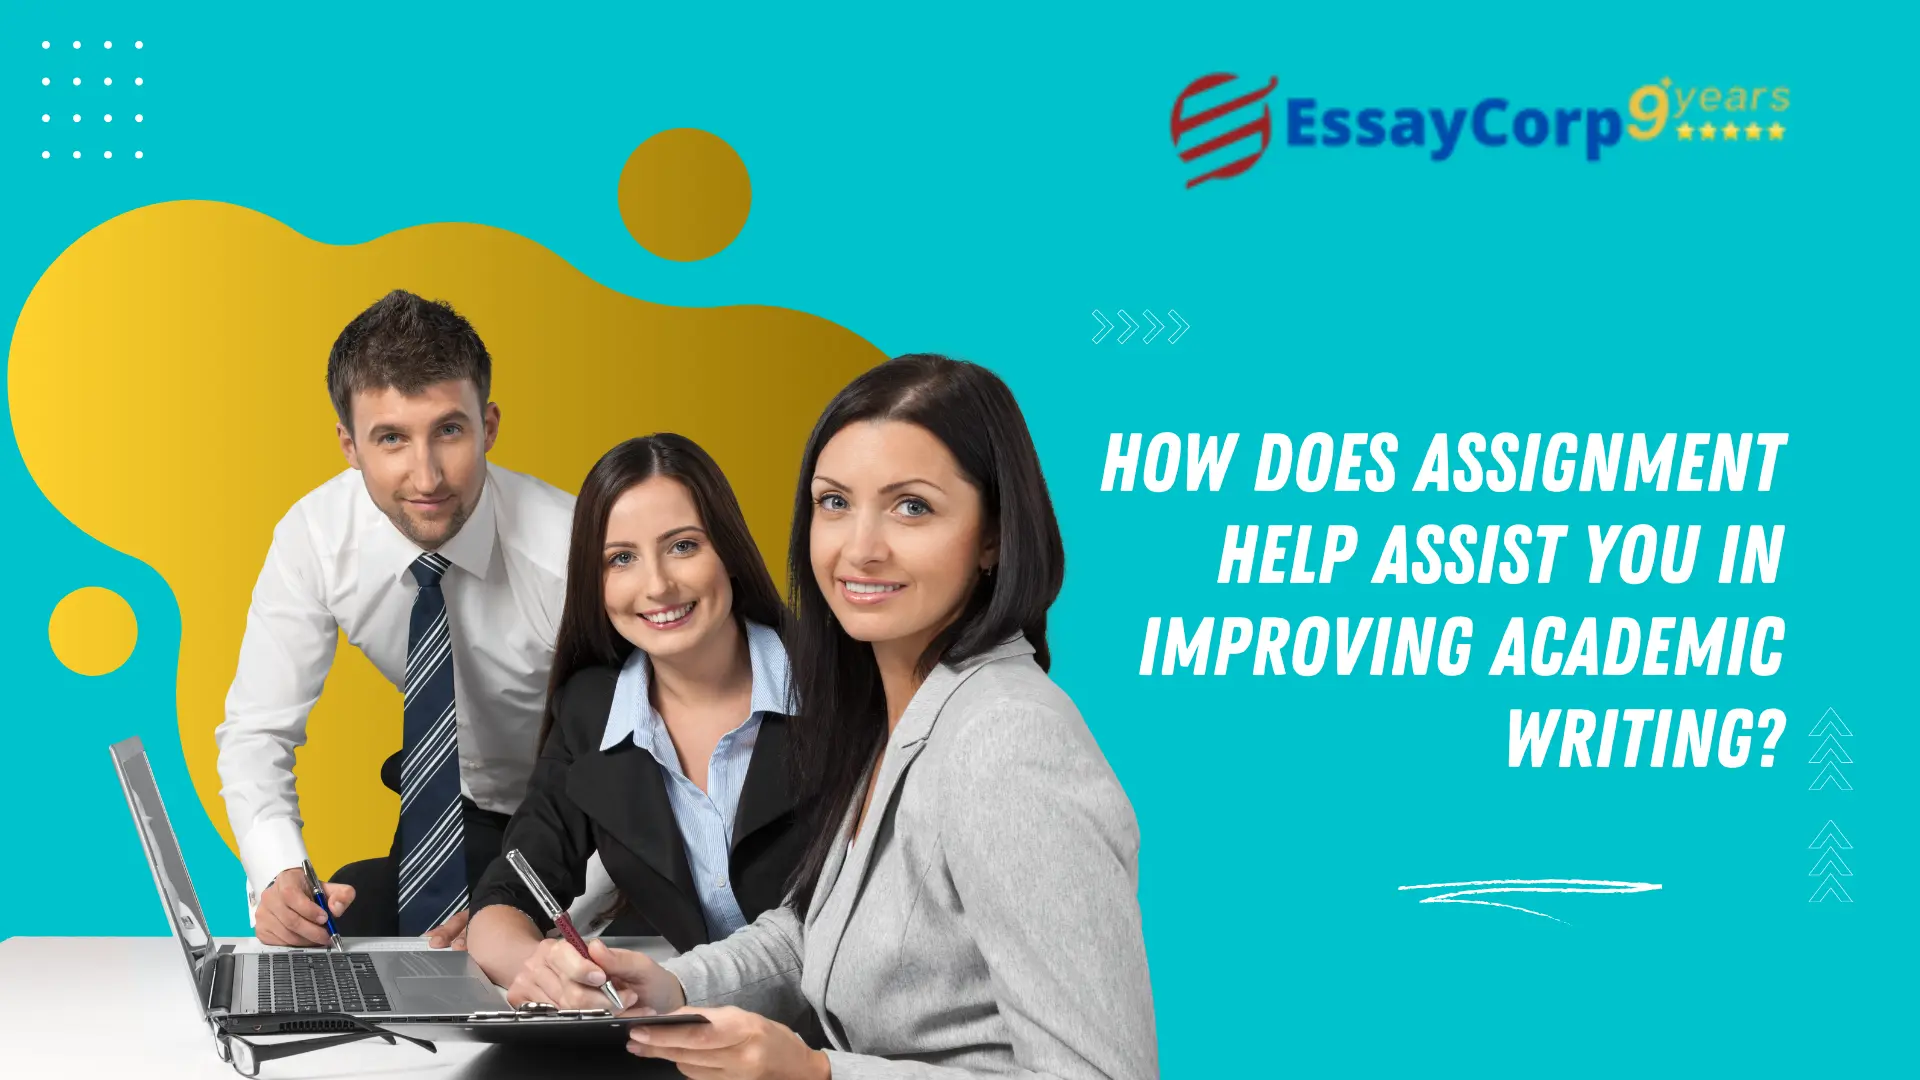 How Does Assignment Help Assist You in Improving Academic Writing?